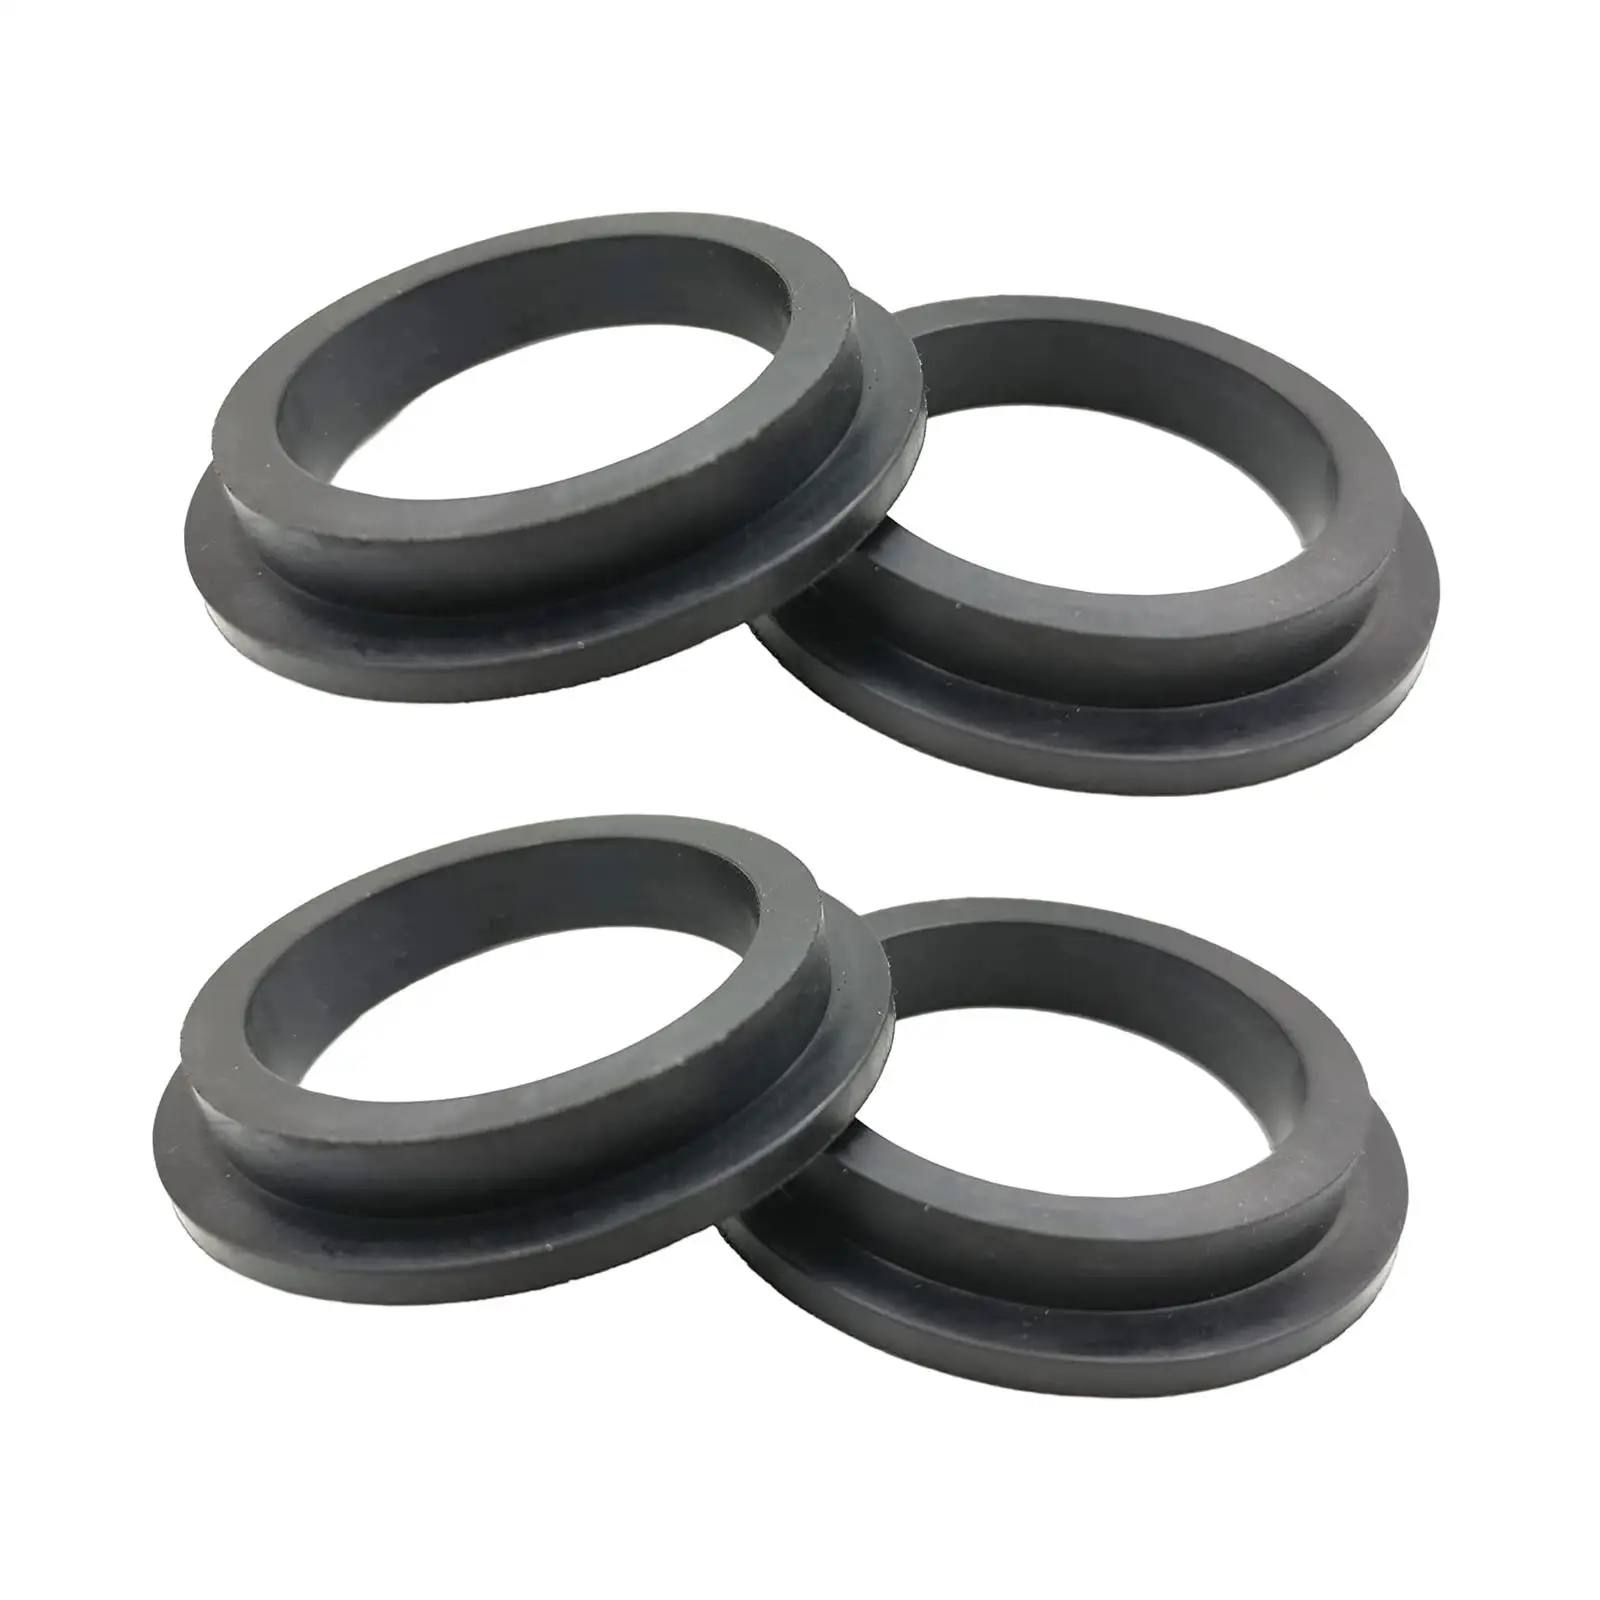 Pool Filter O Ring Rubber Washer 11412 Pool Hose Gasket for Hot Tub Sand Pump Pool Fittings Repair Replacement Parts